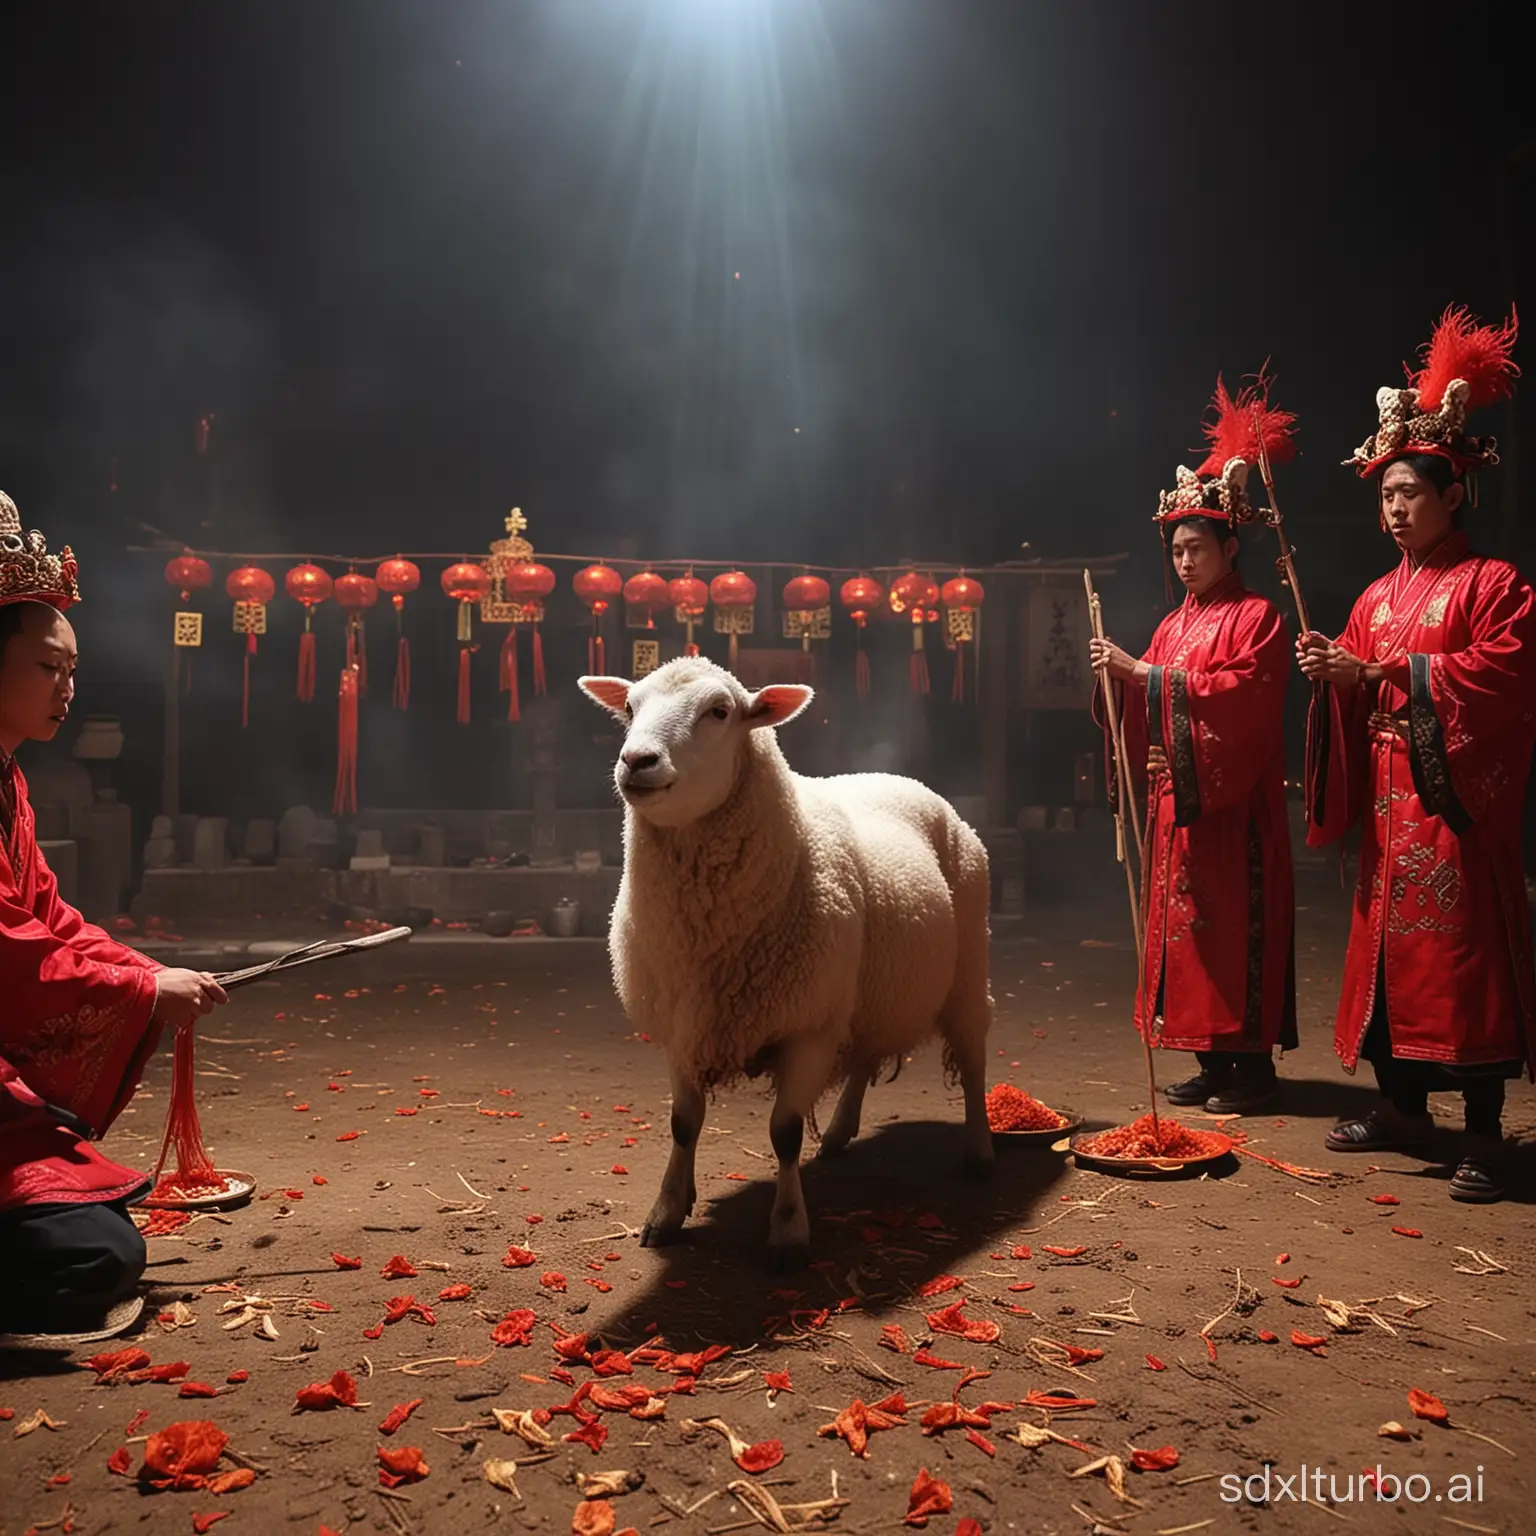 Sacrificial ceremony HD superstition religion lamb offering Chinese tradition horror